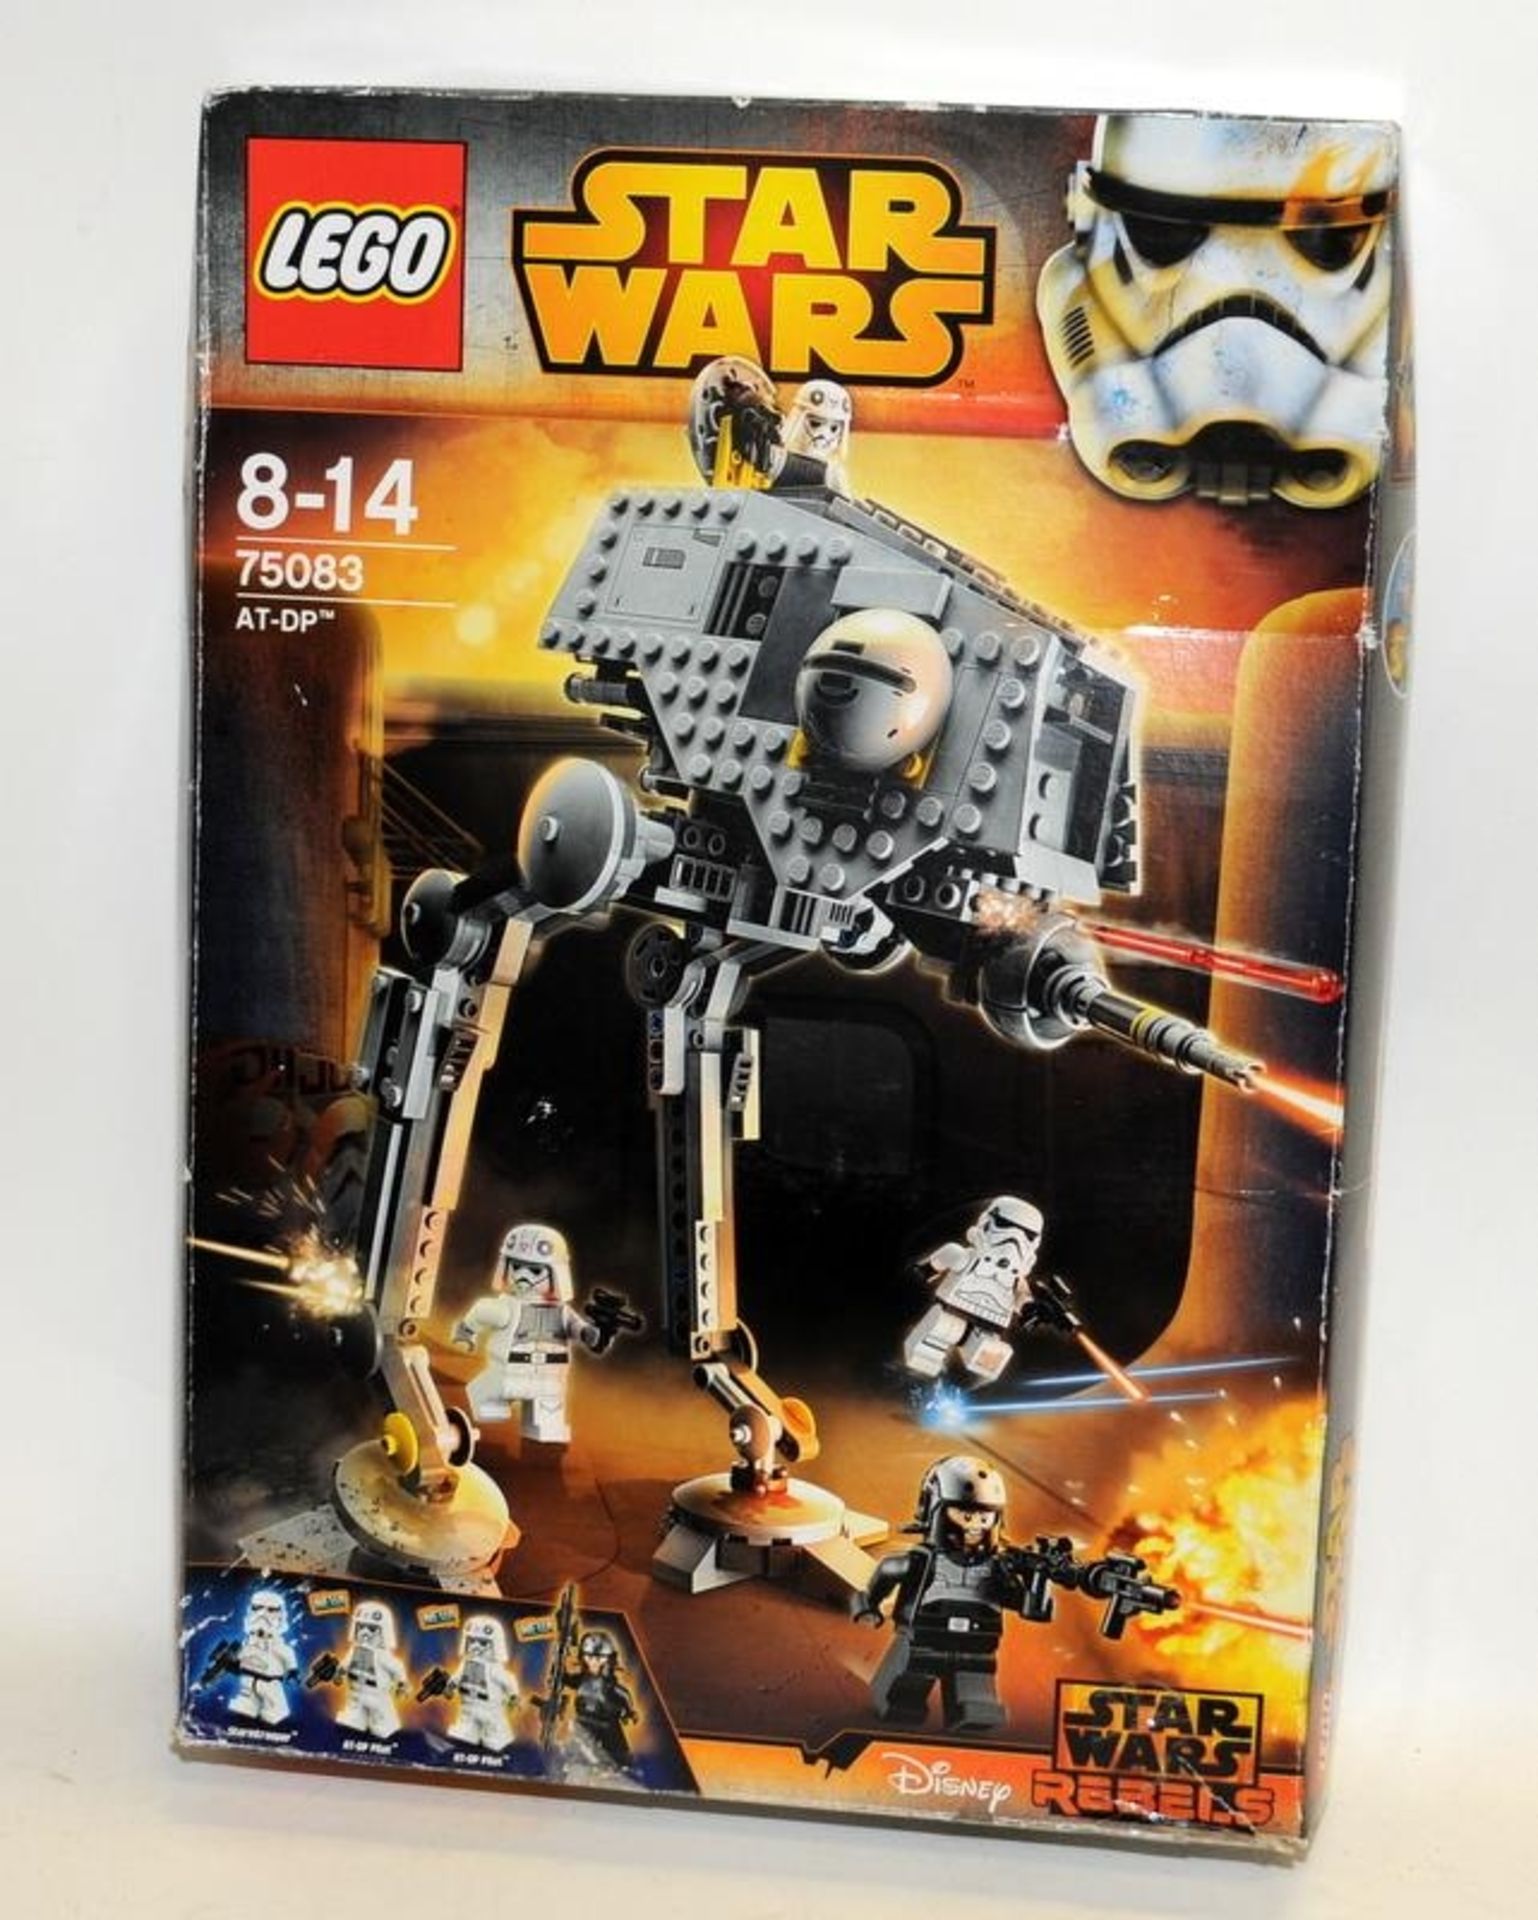 Star Wars Lego: AT-DP ref:75083. Boxed and complete with minifigures and build instructions